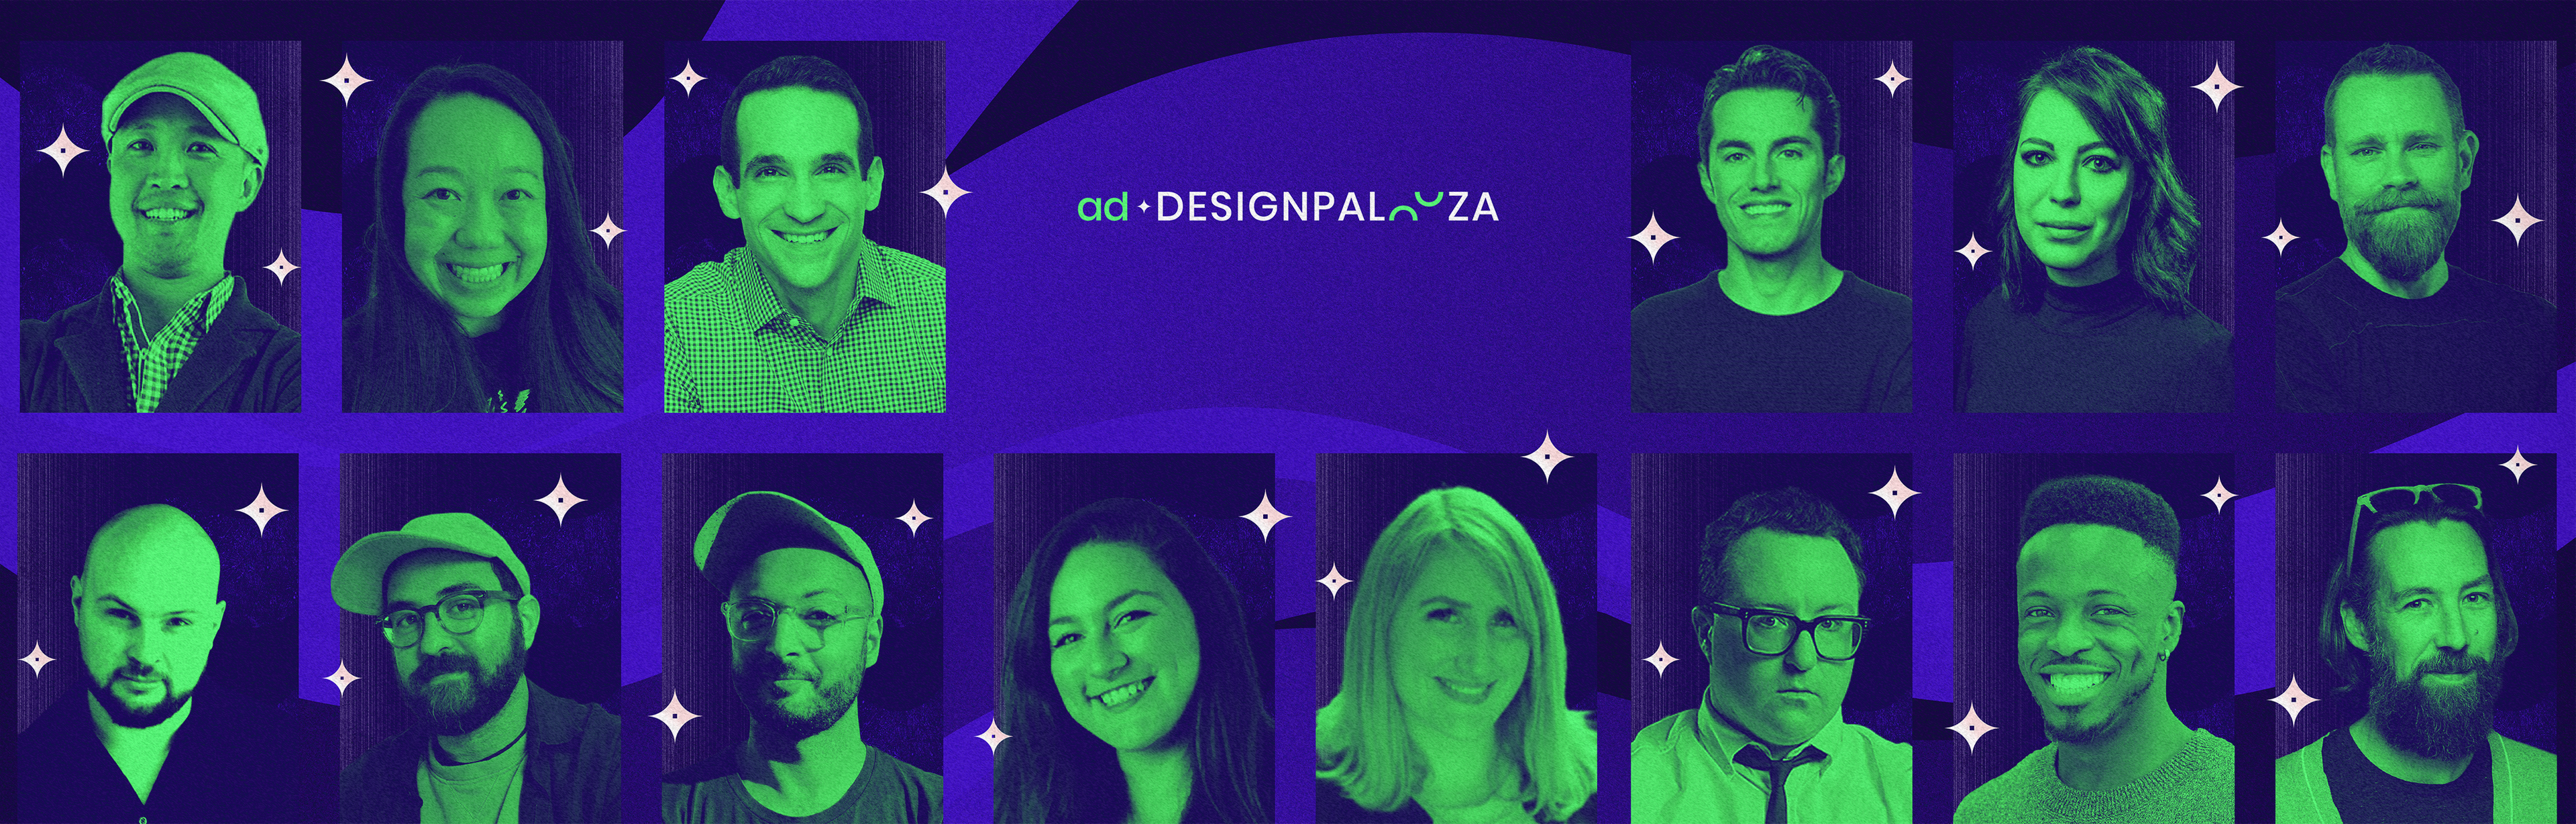 19 Takeaways About Ads, Creativity and Design from Ad Designpalooza